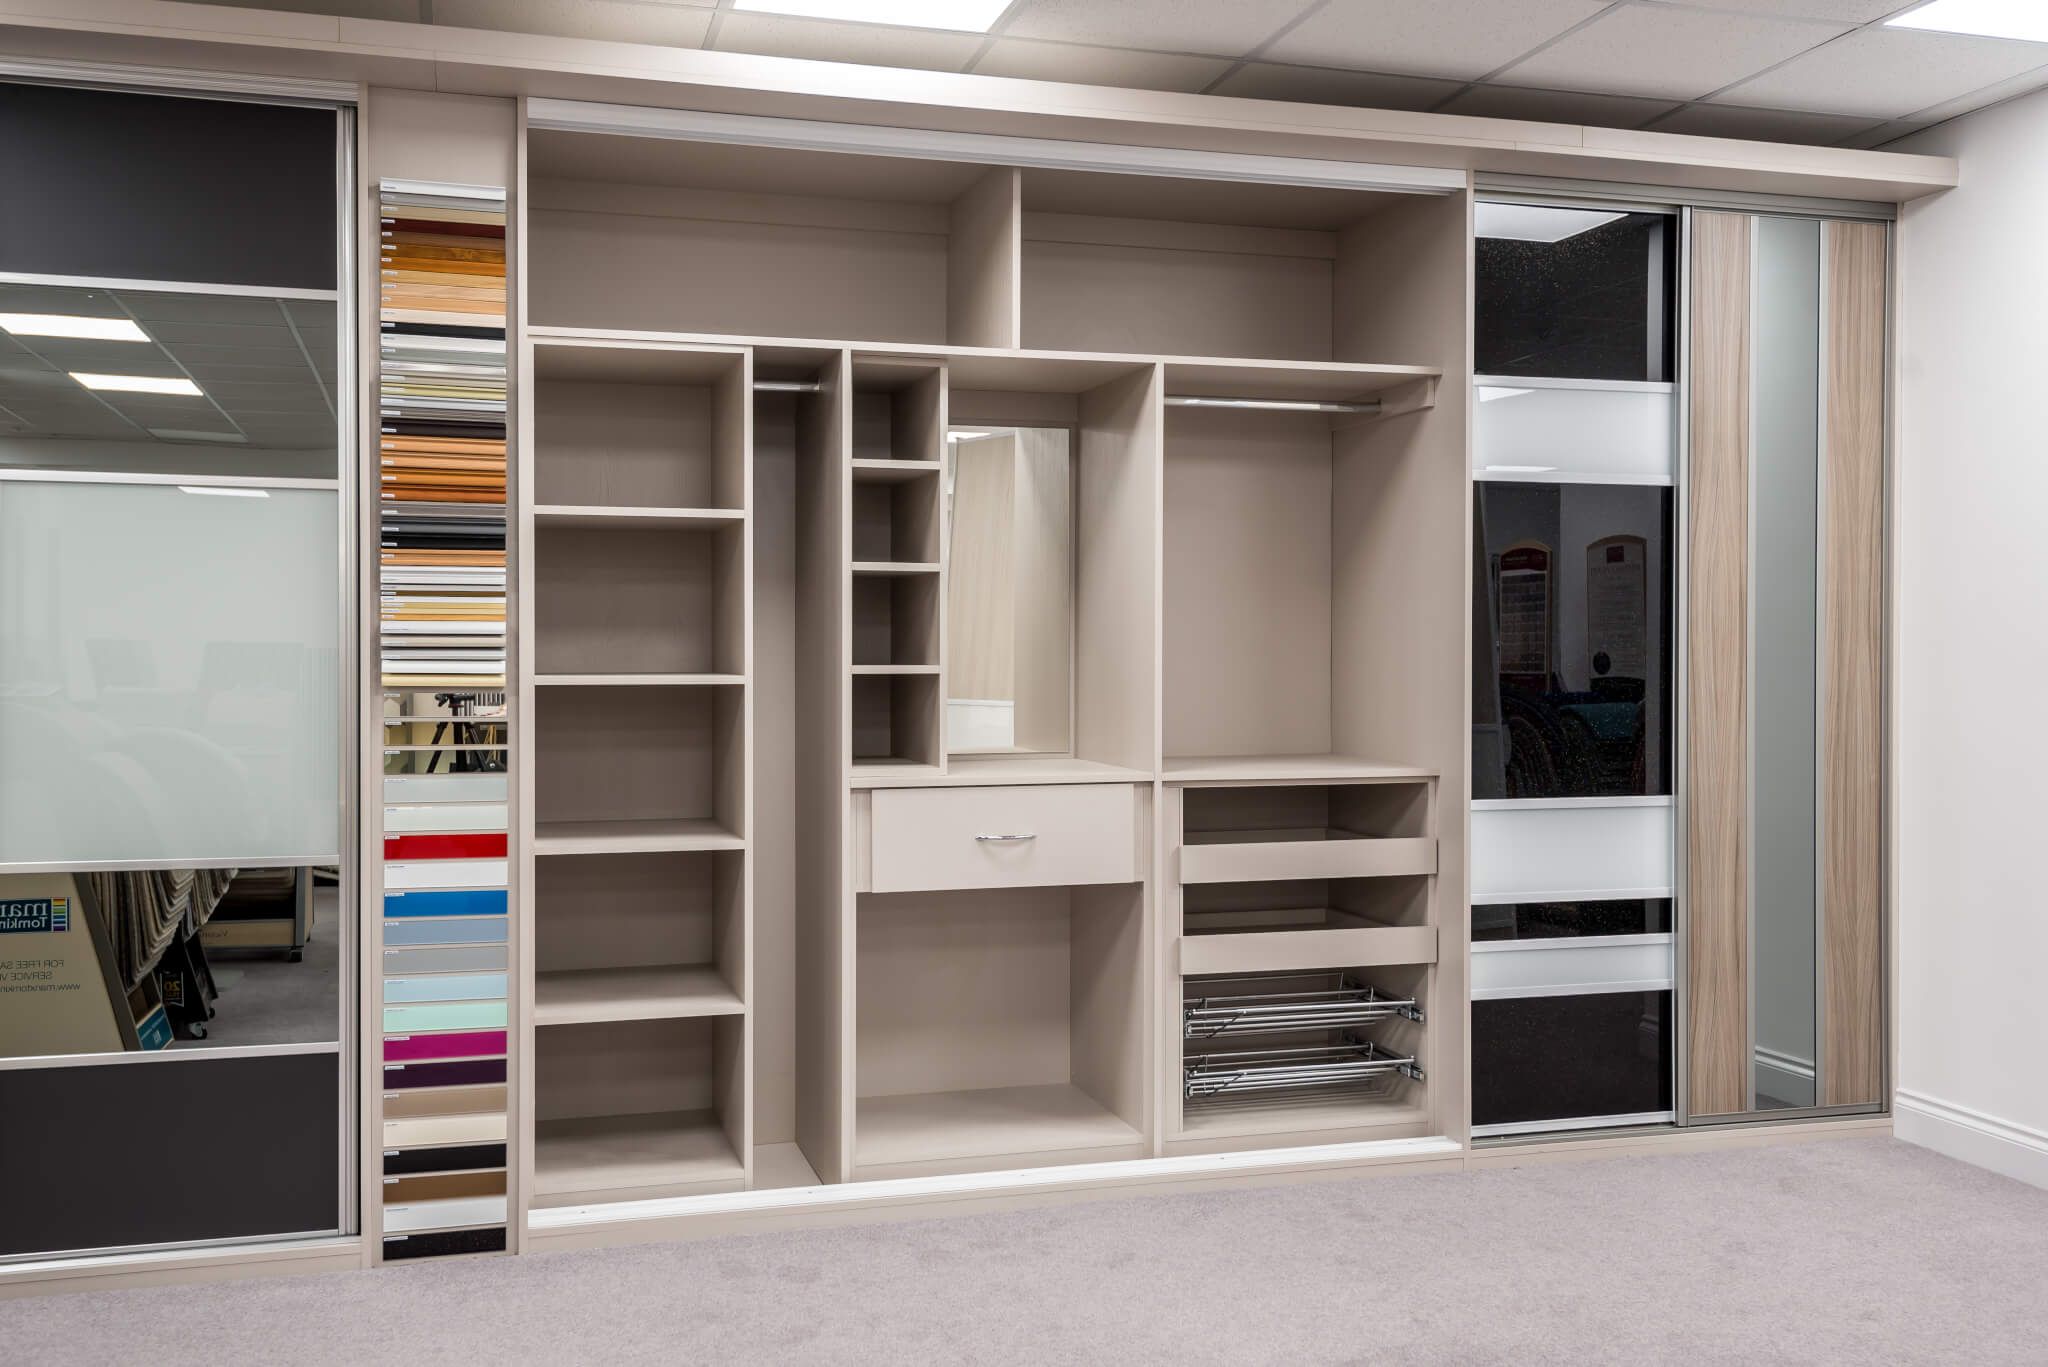 Designing The Perfect Fitted Wardrobe: Shelves Vs Drawers Vs Hanging Space  (which Is Best)? | Millers Pertaining To Where To  Wardrobes (View 2 of 15)